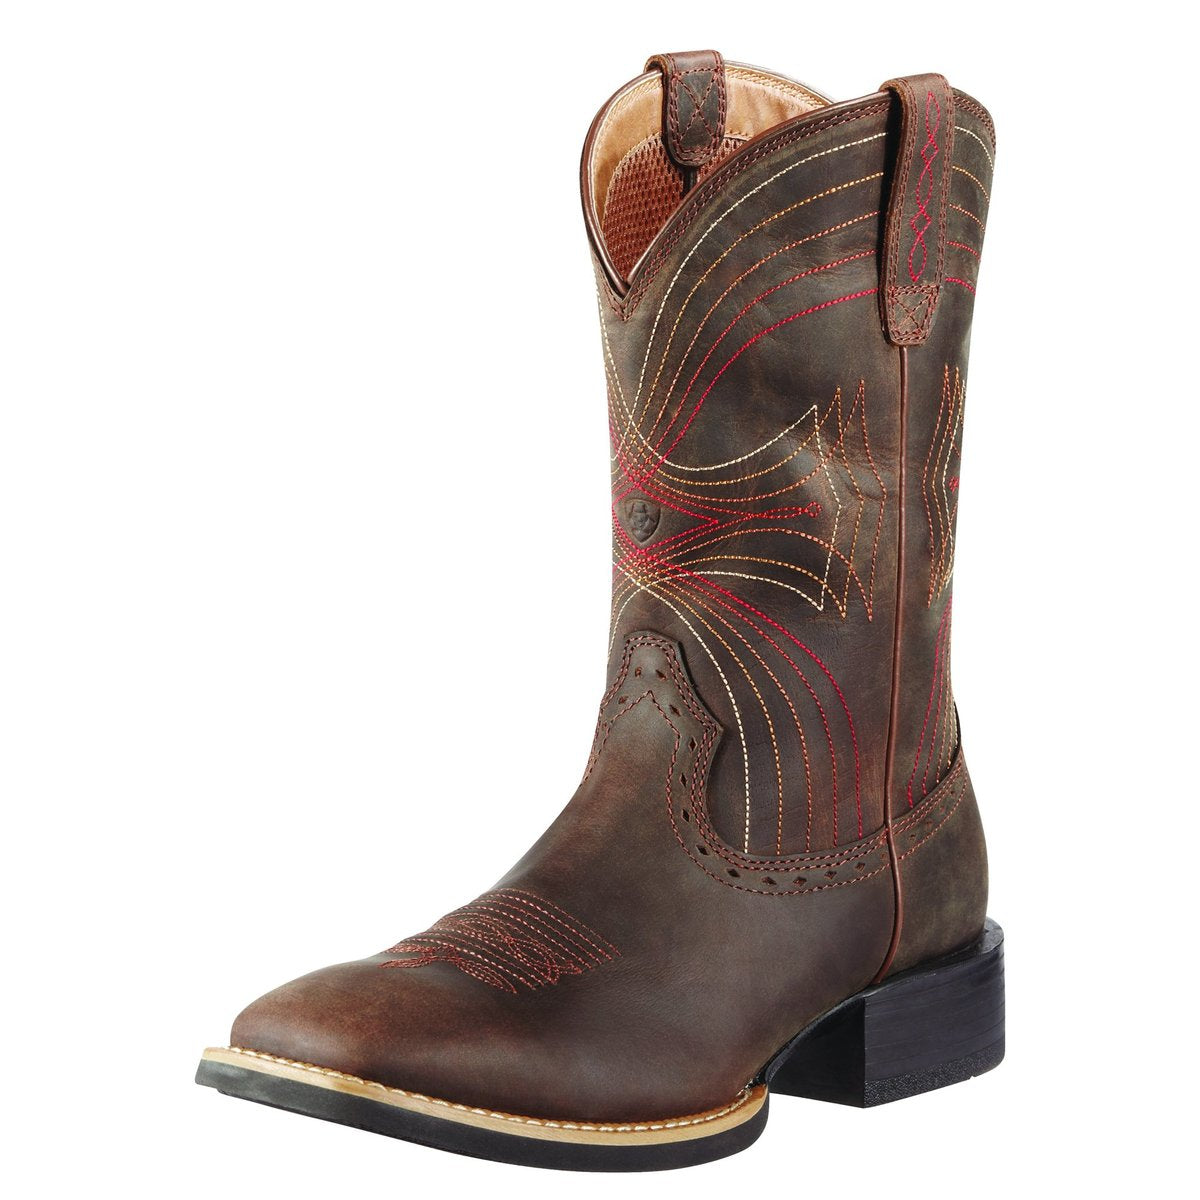 Ariat Mns Sport Wide Sq Toe Distressed Brown - CMC Special